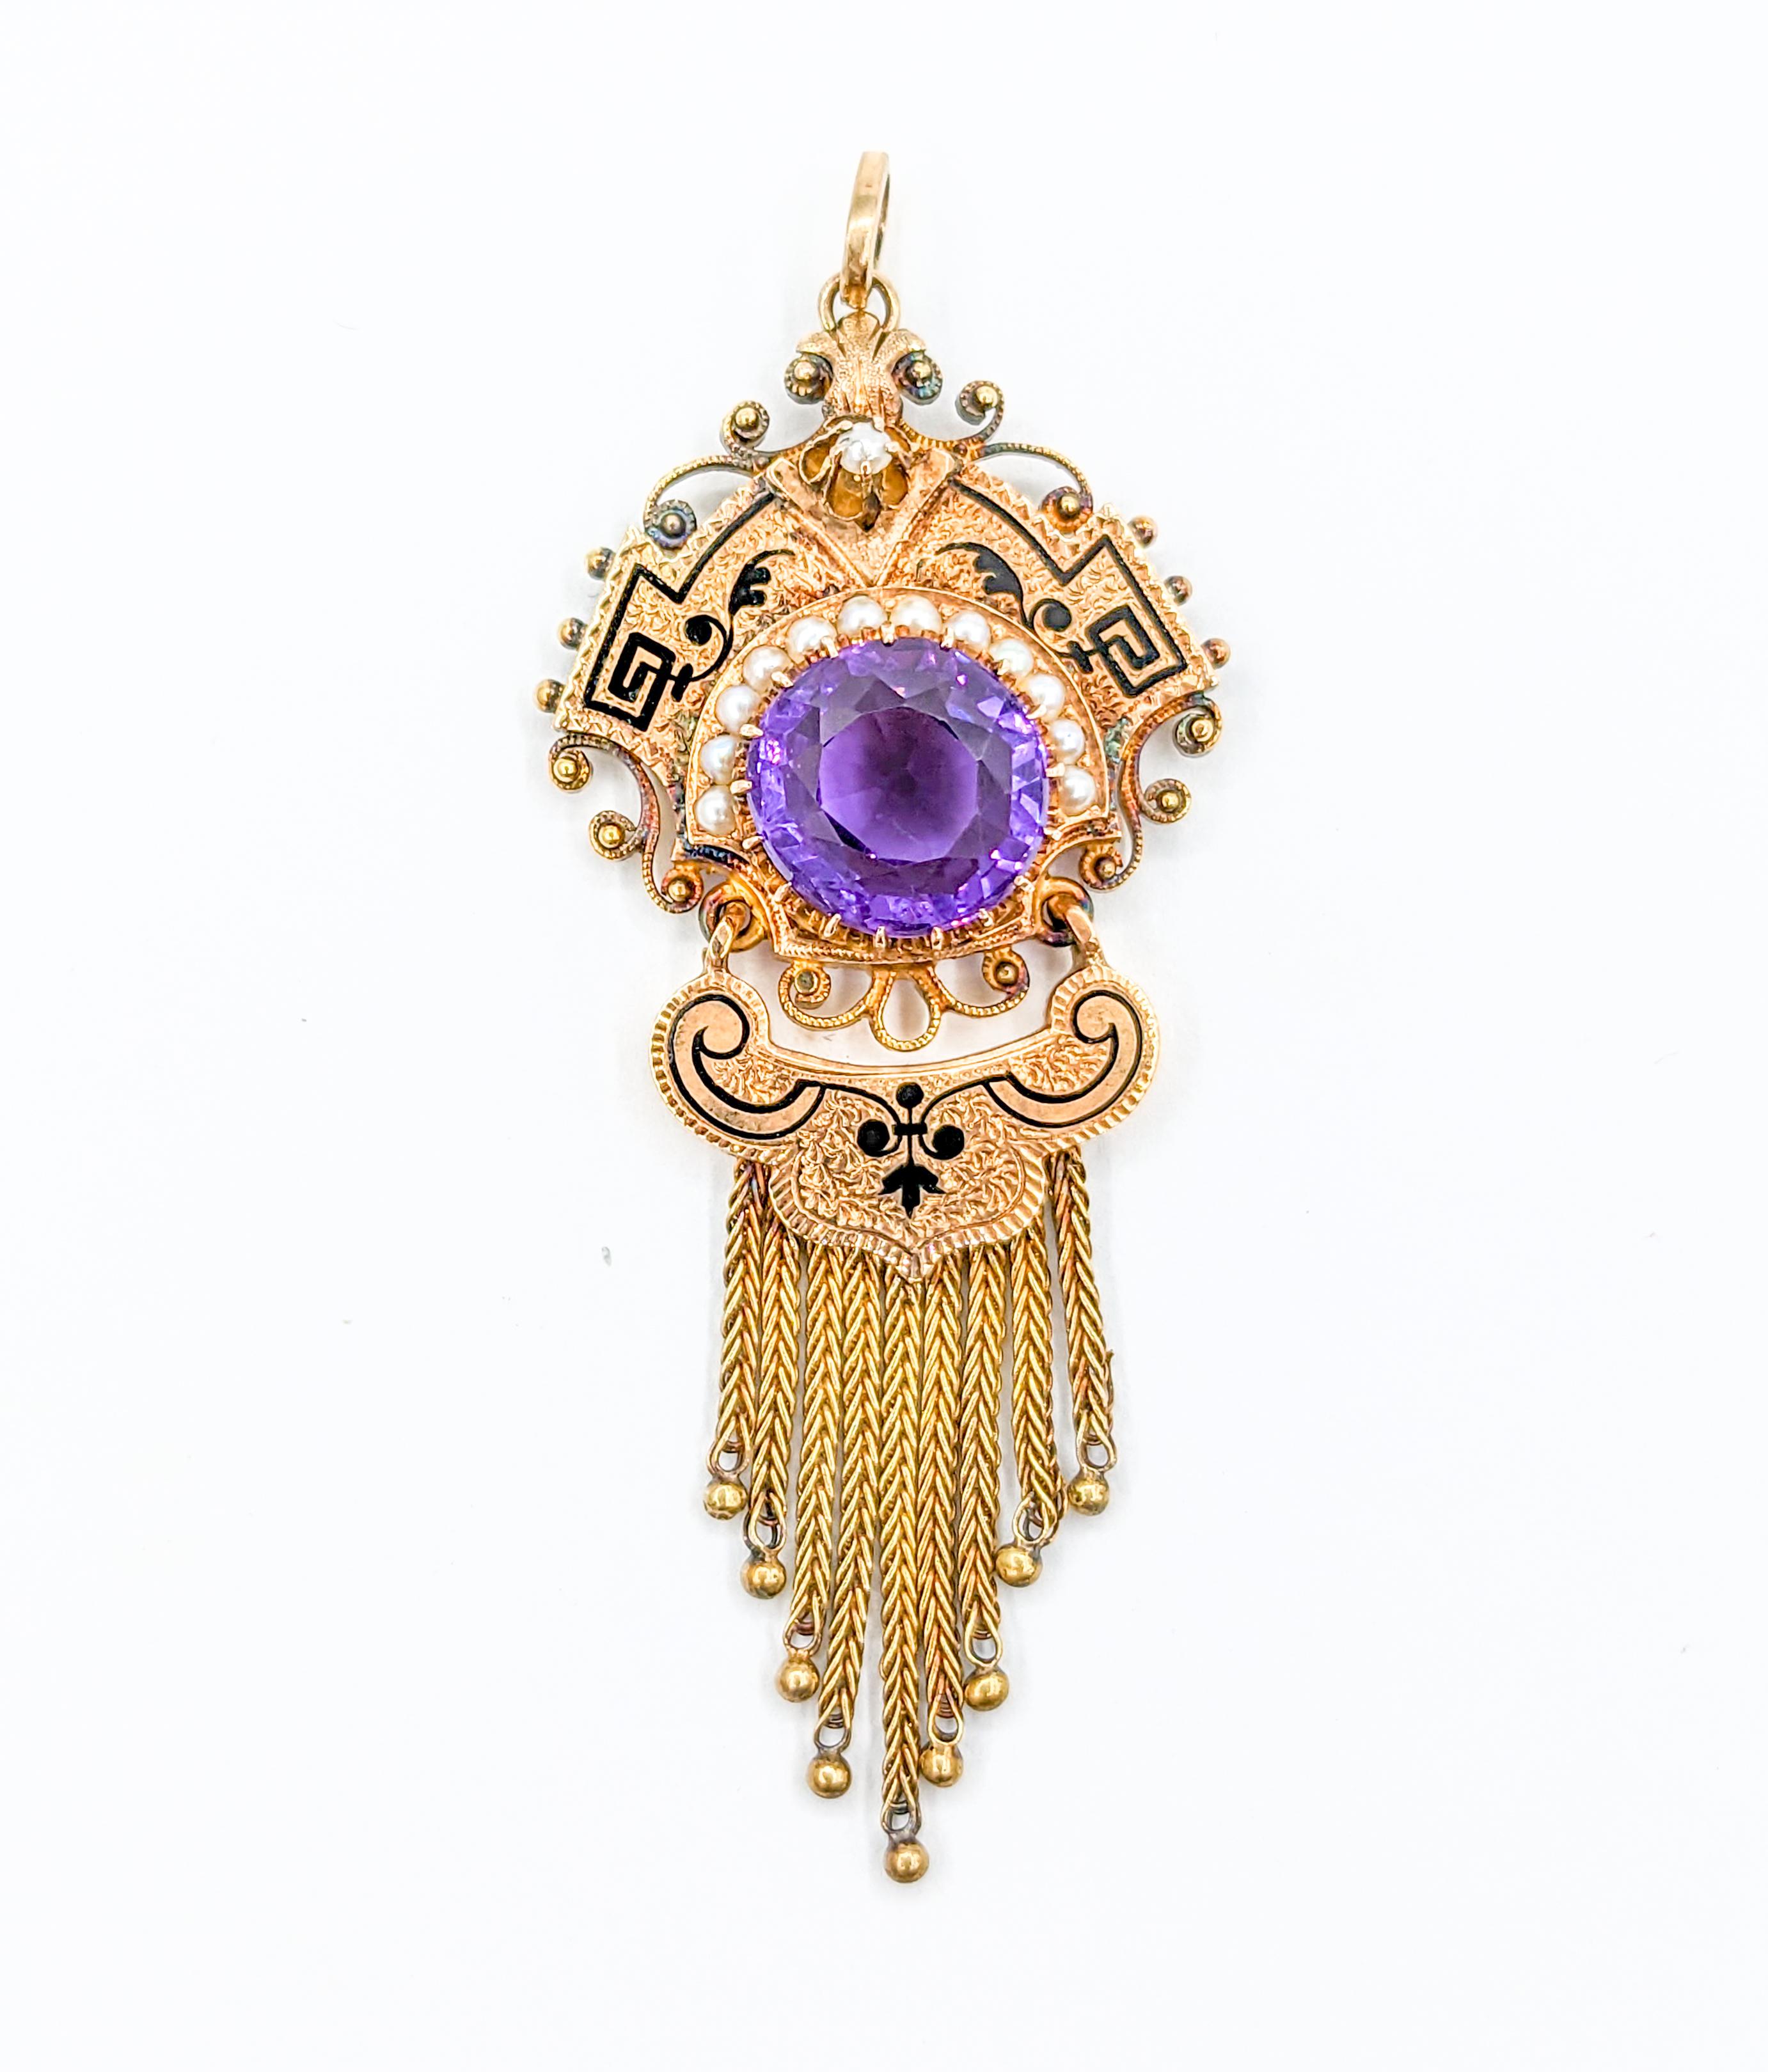 Victorian Amethyst Gold Taille d'Épargne Fringe Pendant with Seed Pearls For Sale 3